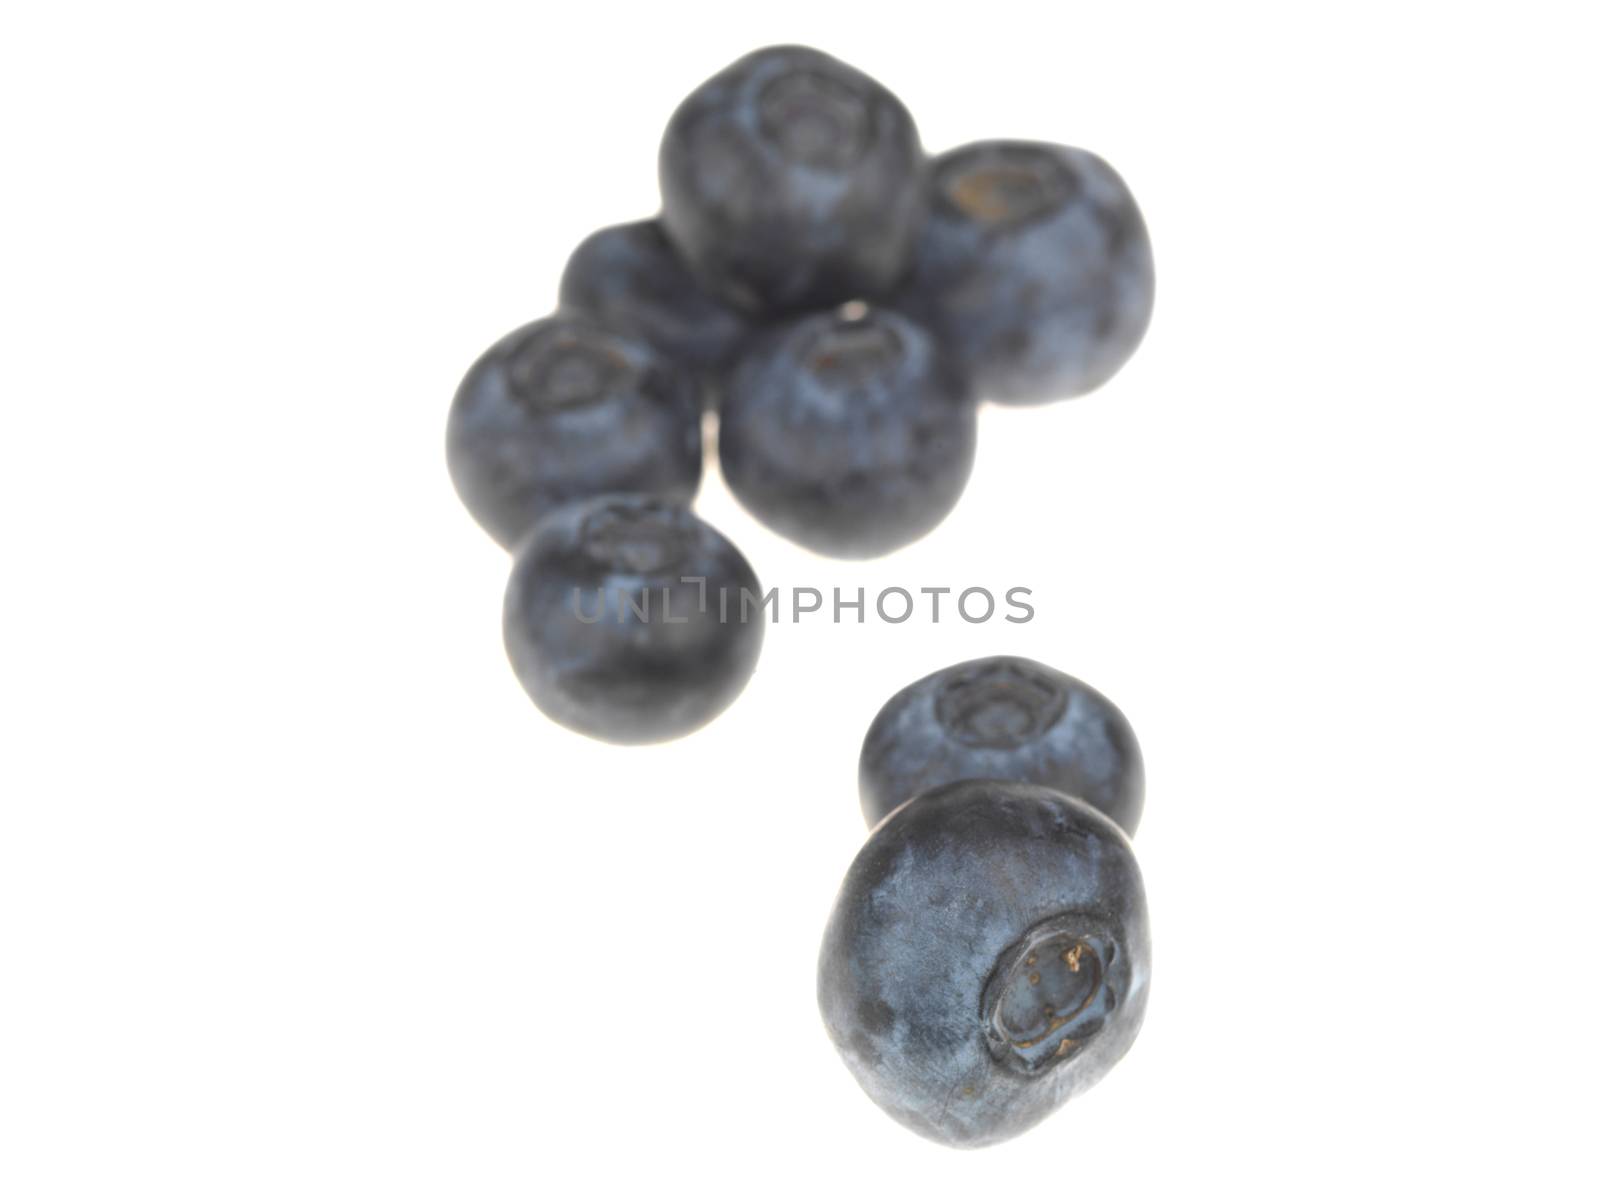 Blueberries by Whiteboxmedia